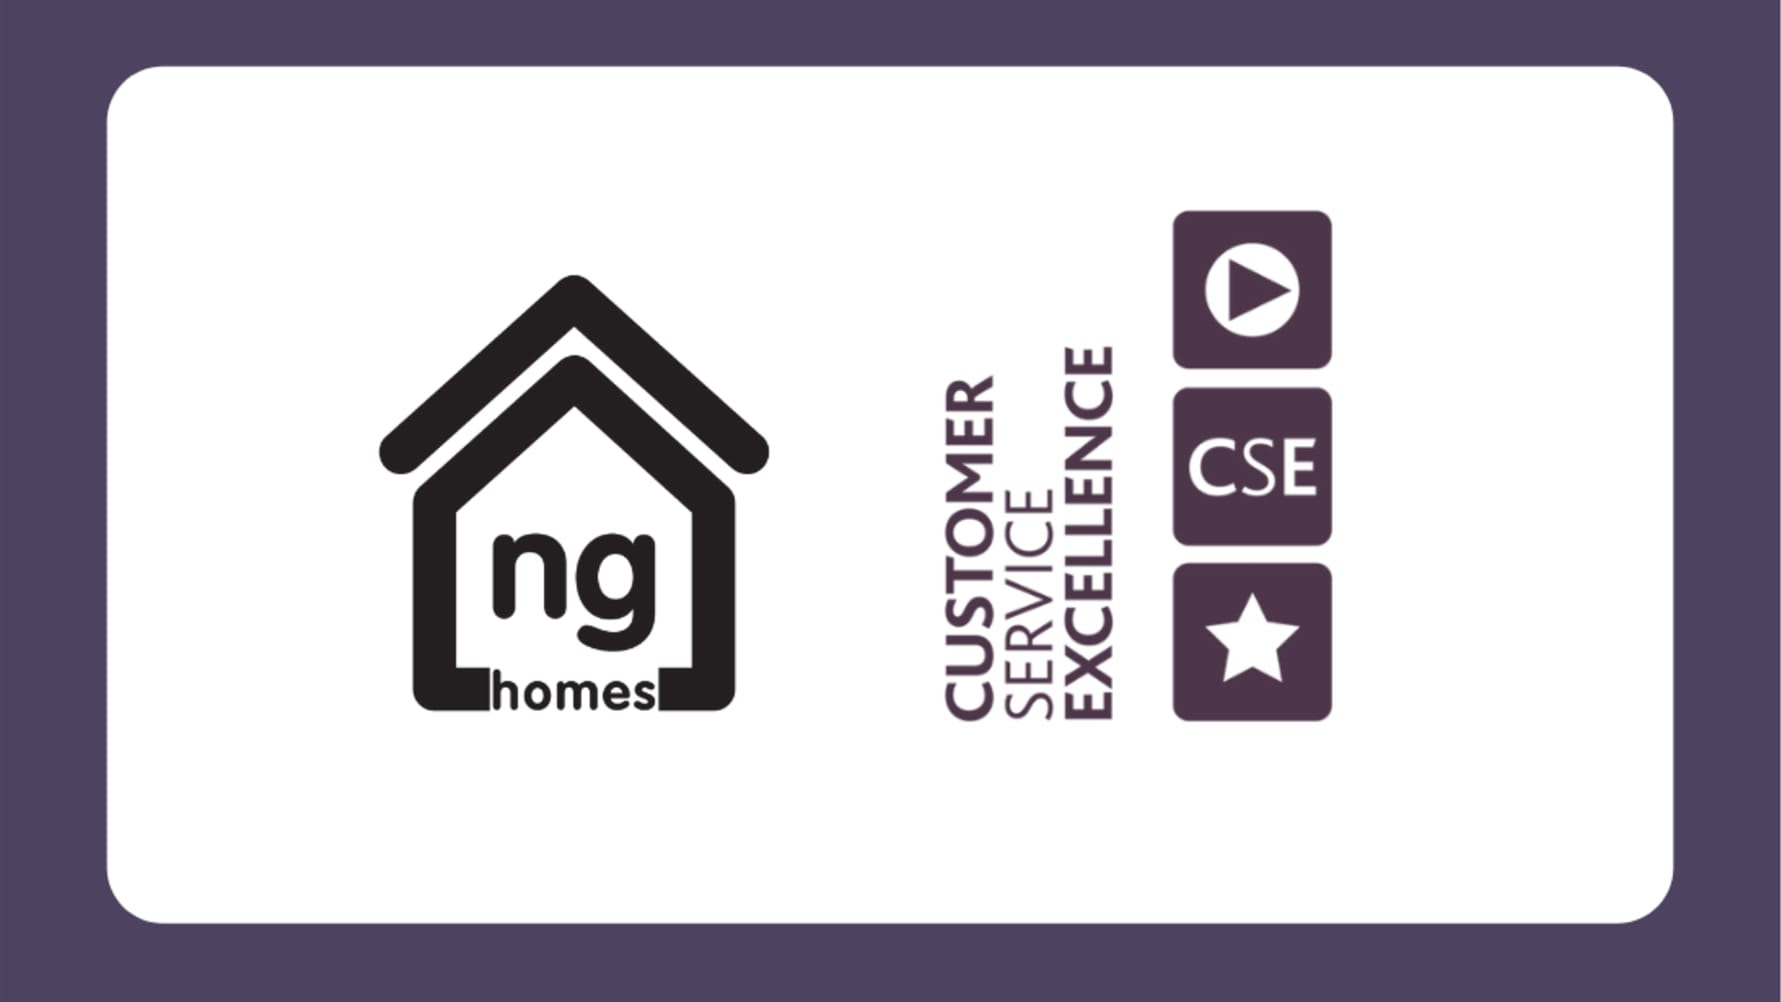 ng homes retains Customer Service Excellence accreditation